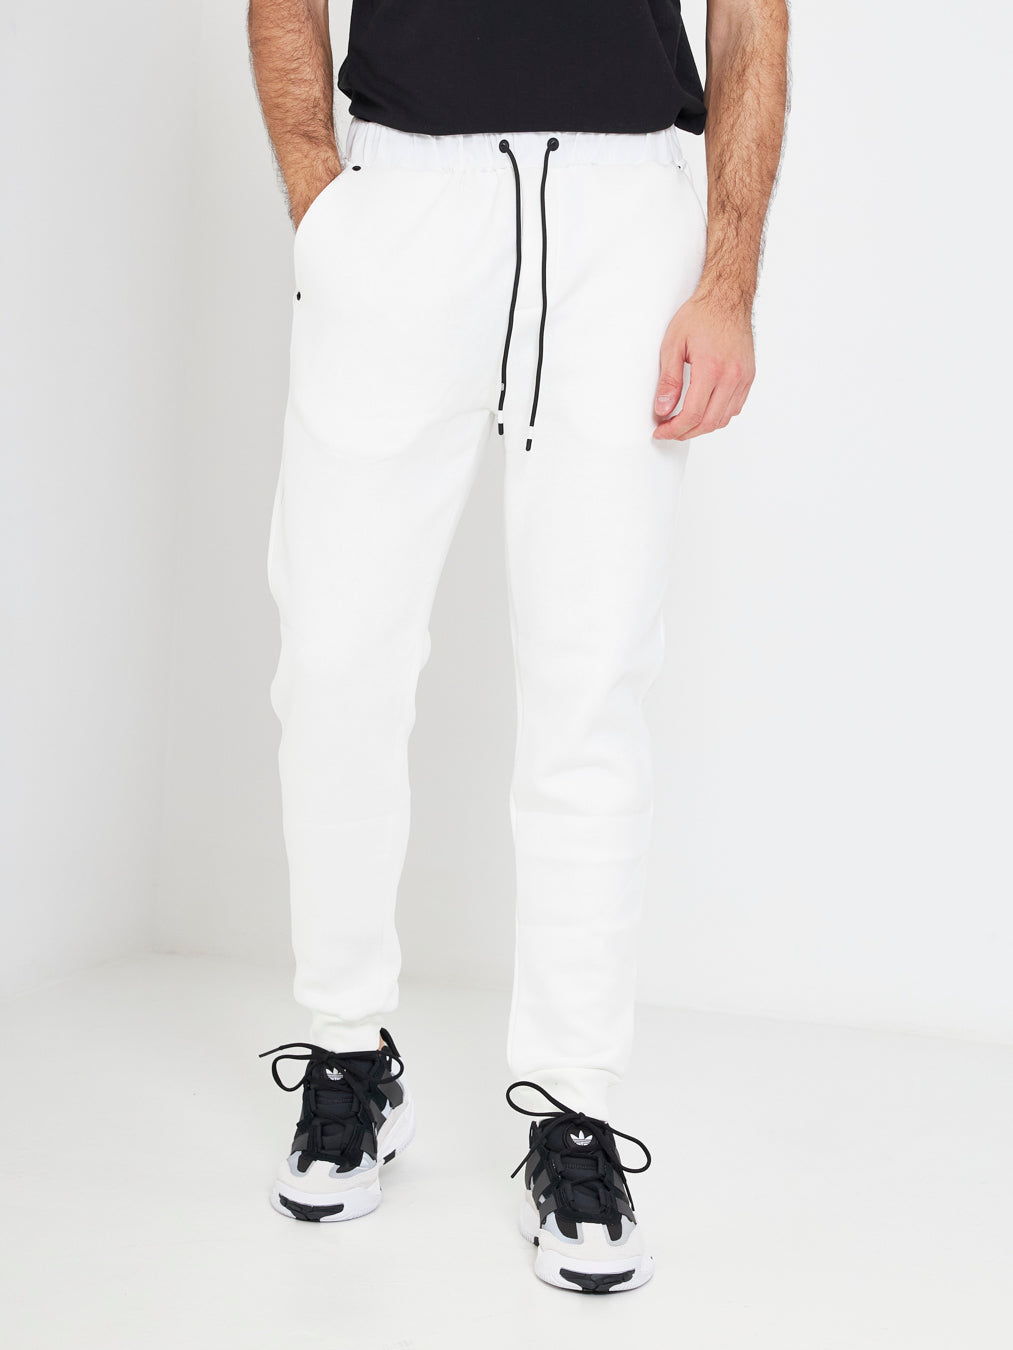 White Over white tracksuit bottoms